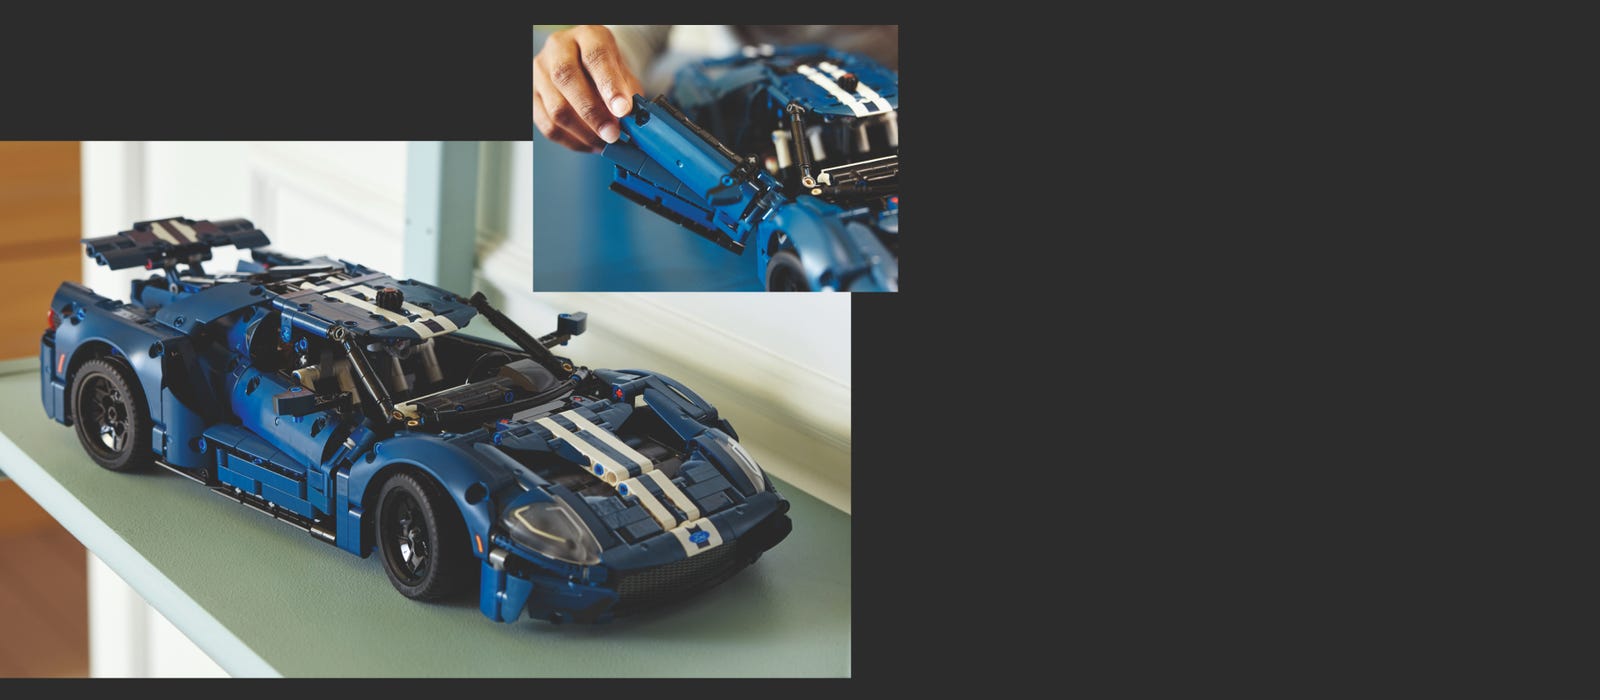 9 best Lego car sets to build in 2022